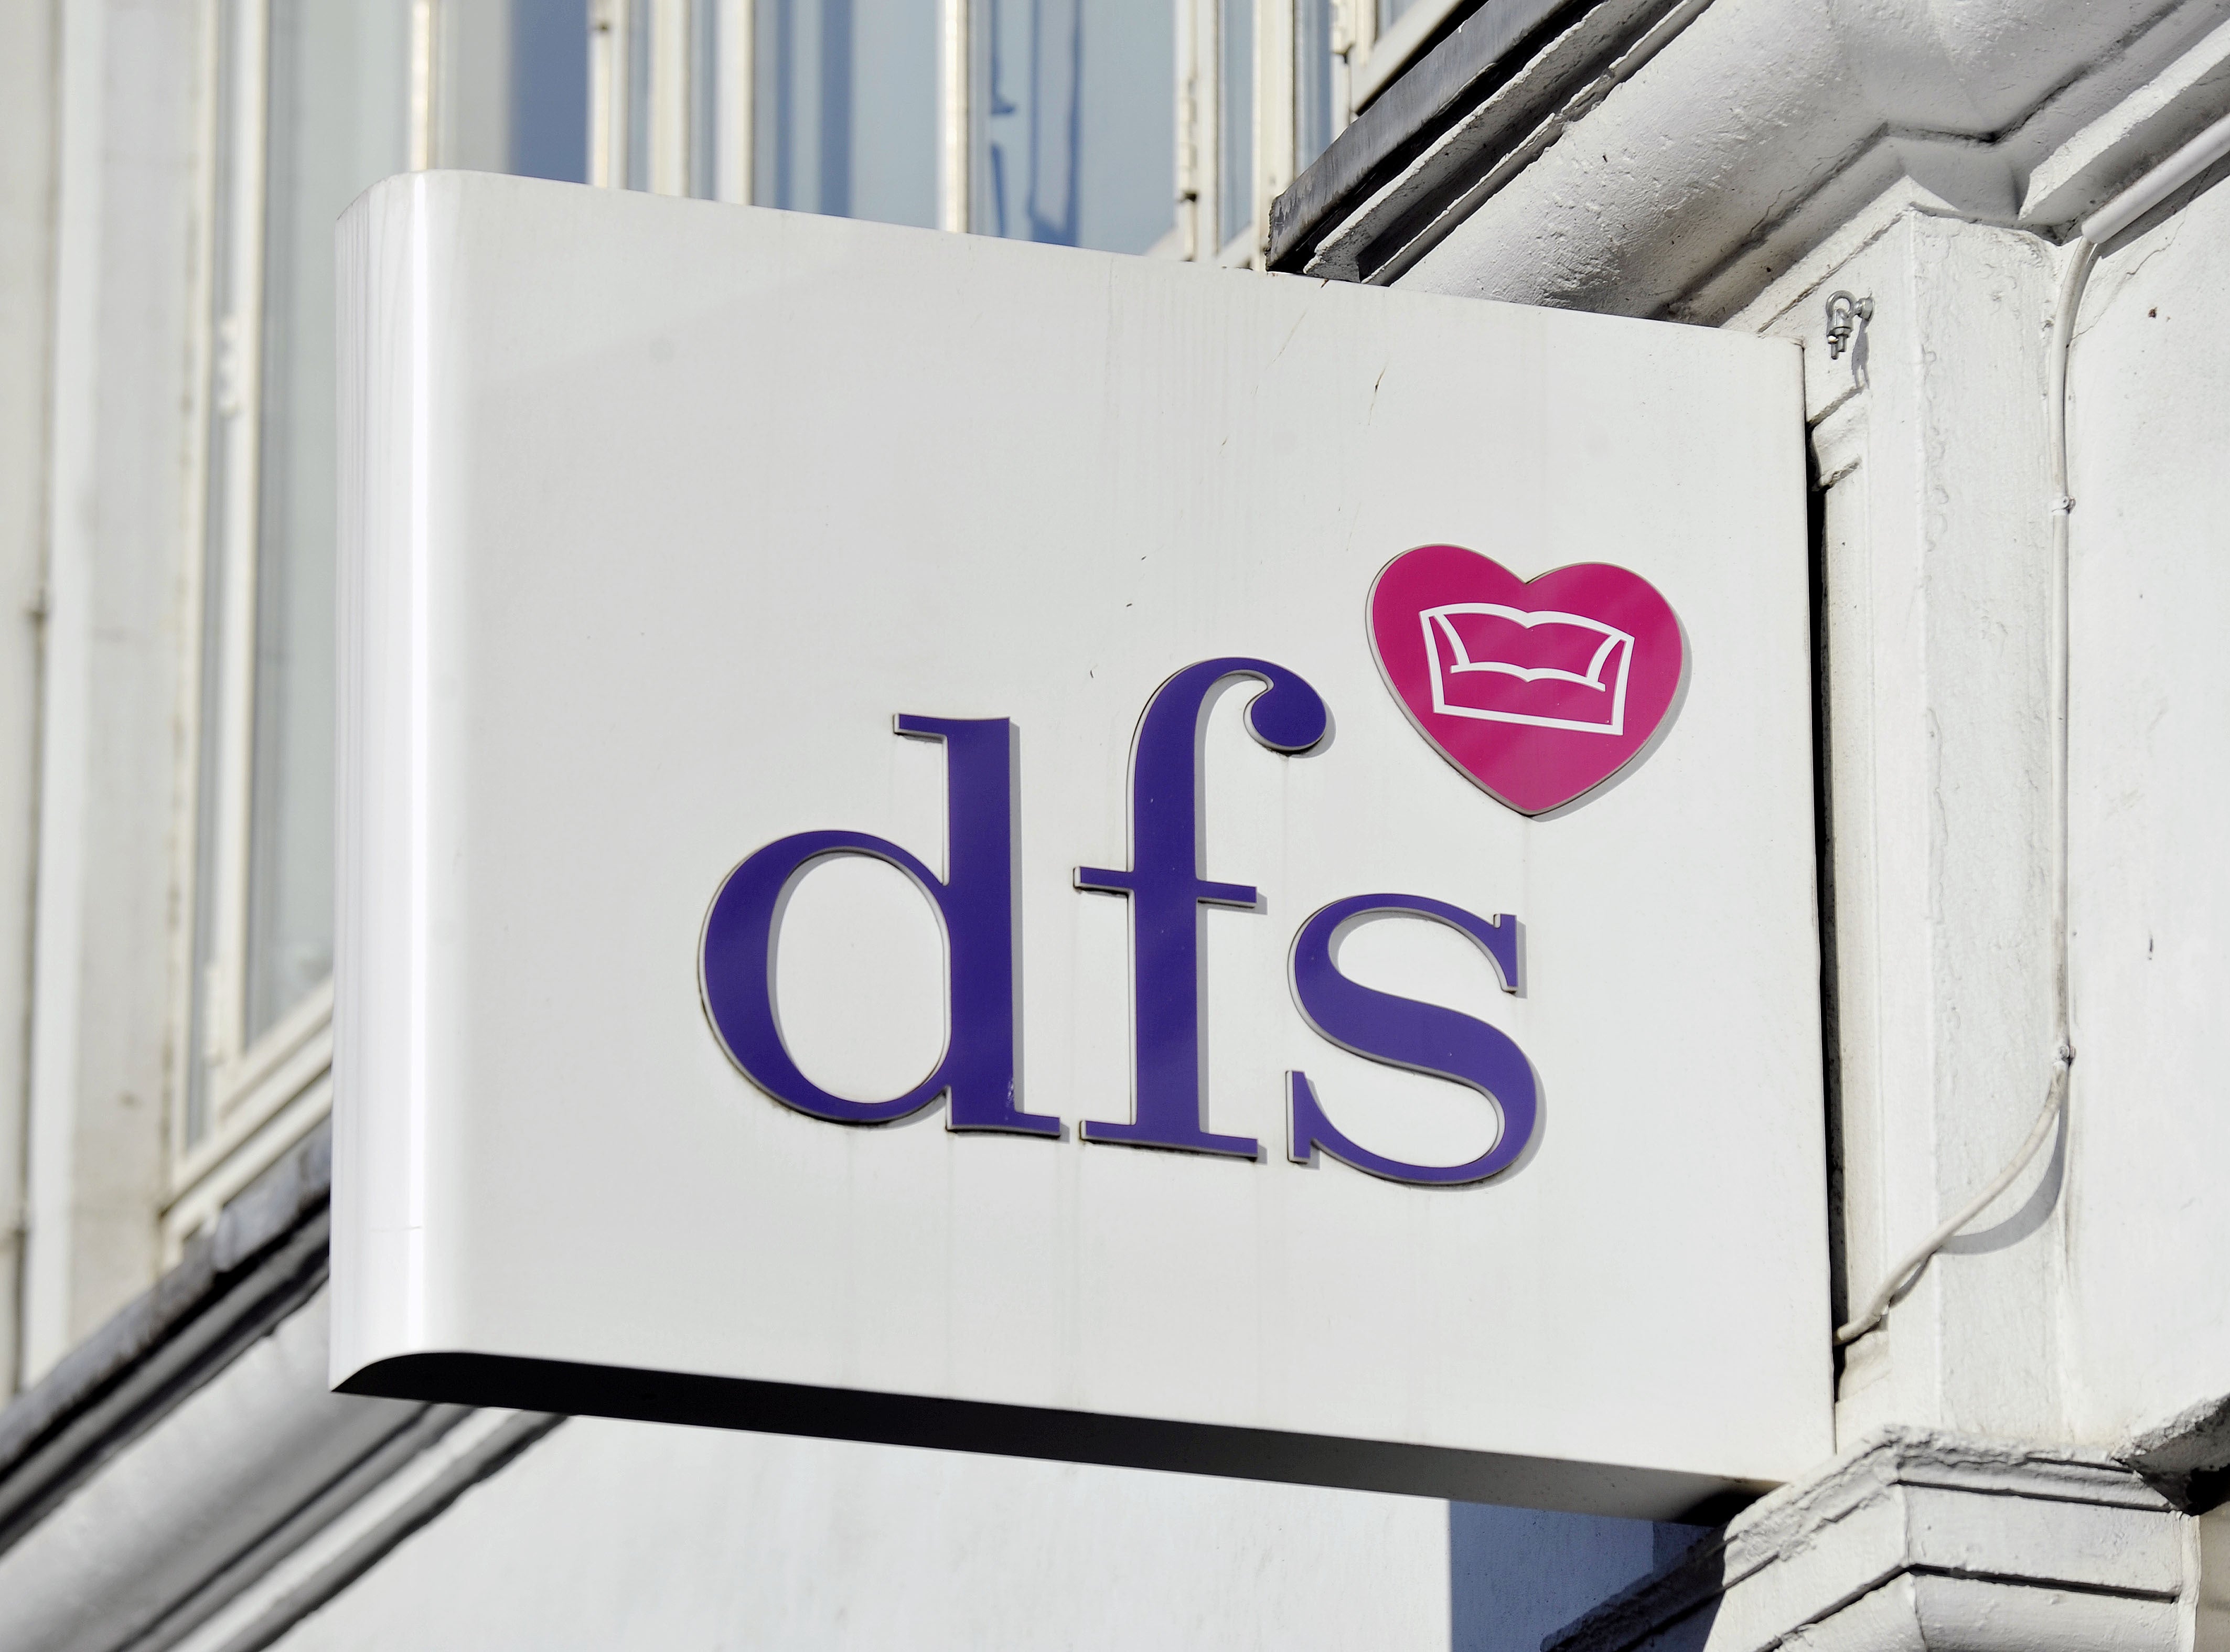 Sofa chain DFS posted a drop in half-year sales and profits as it revealed a hit of around £21m from supply chain difficulties and warned of ongoing disruption (Nick Ansell/PA)